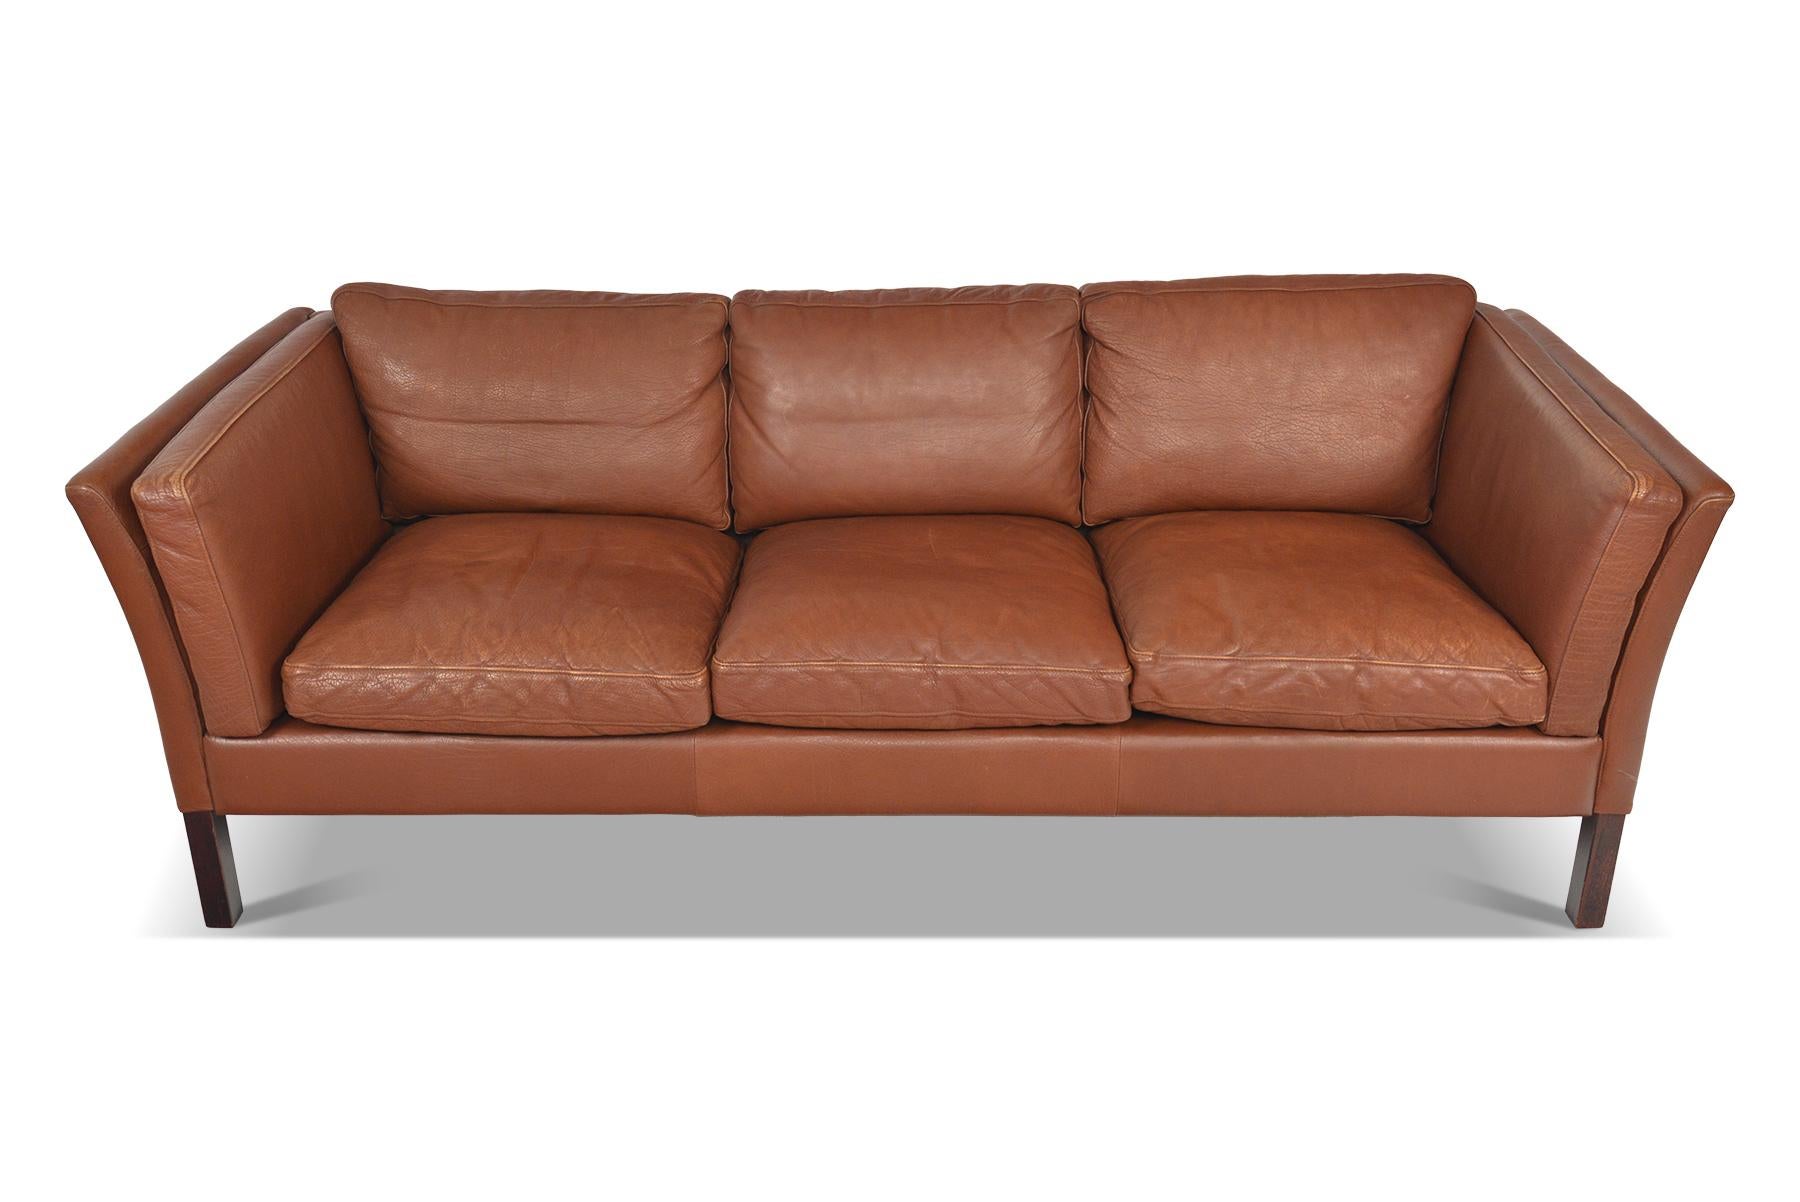 This Danish modern sofa is covered in original patinated rust toned leather. The simple bowed arm design offers an elegant profile. Eight cushions line the interior for a comfortable sitting experience. The sofa stands on a tapered stained beech